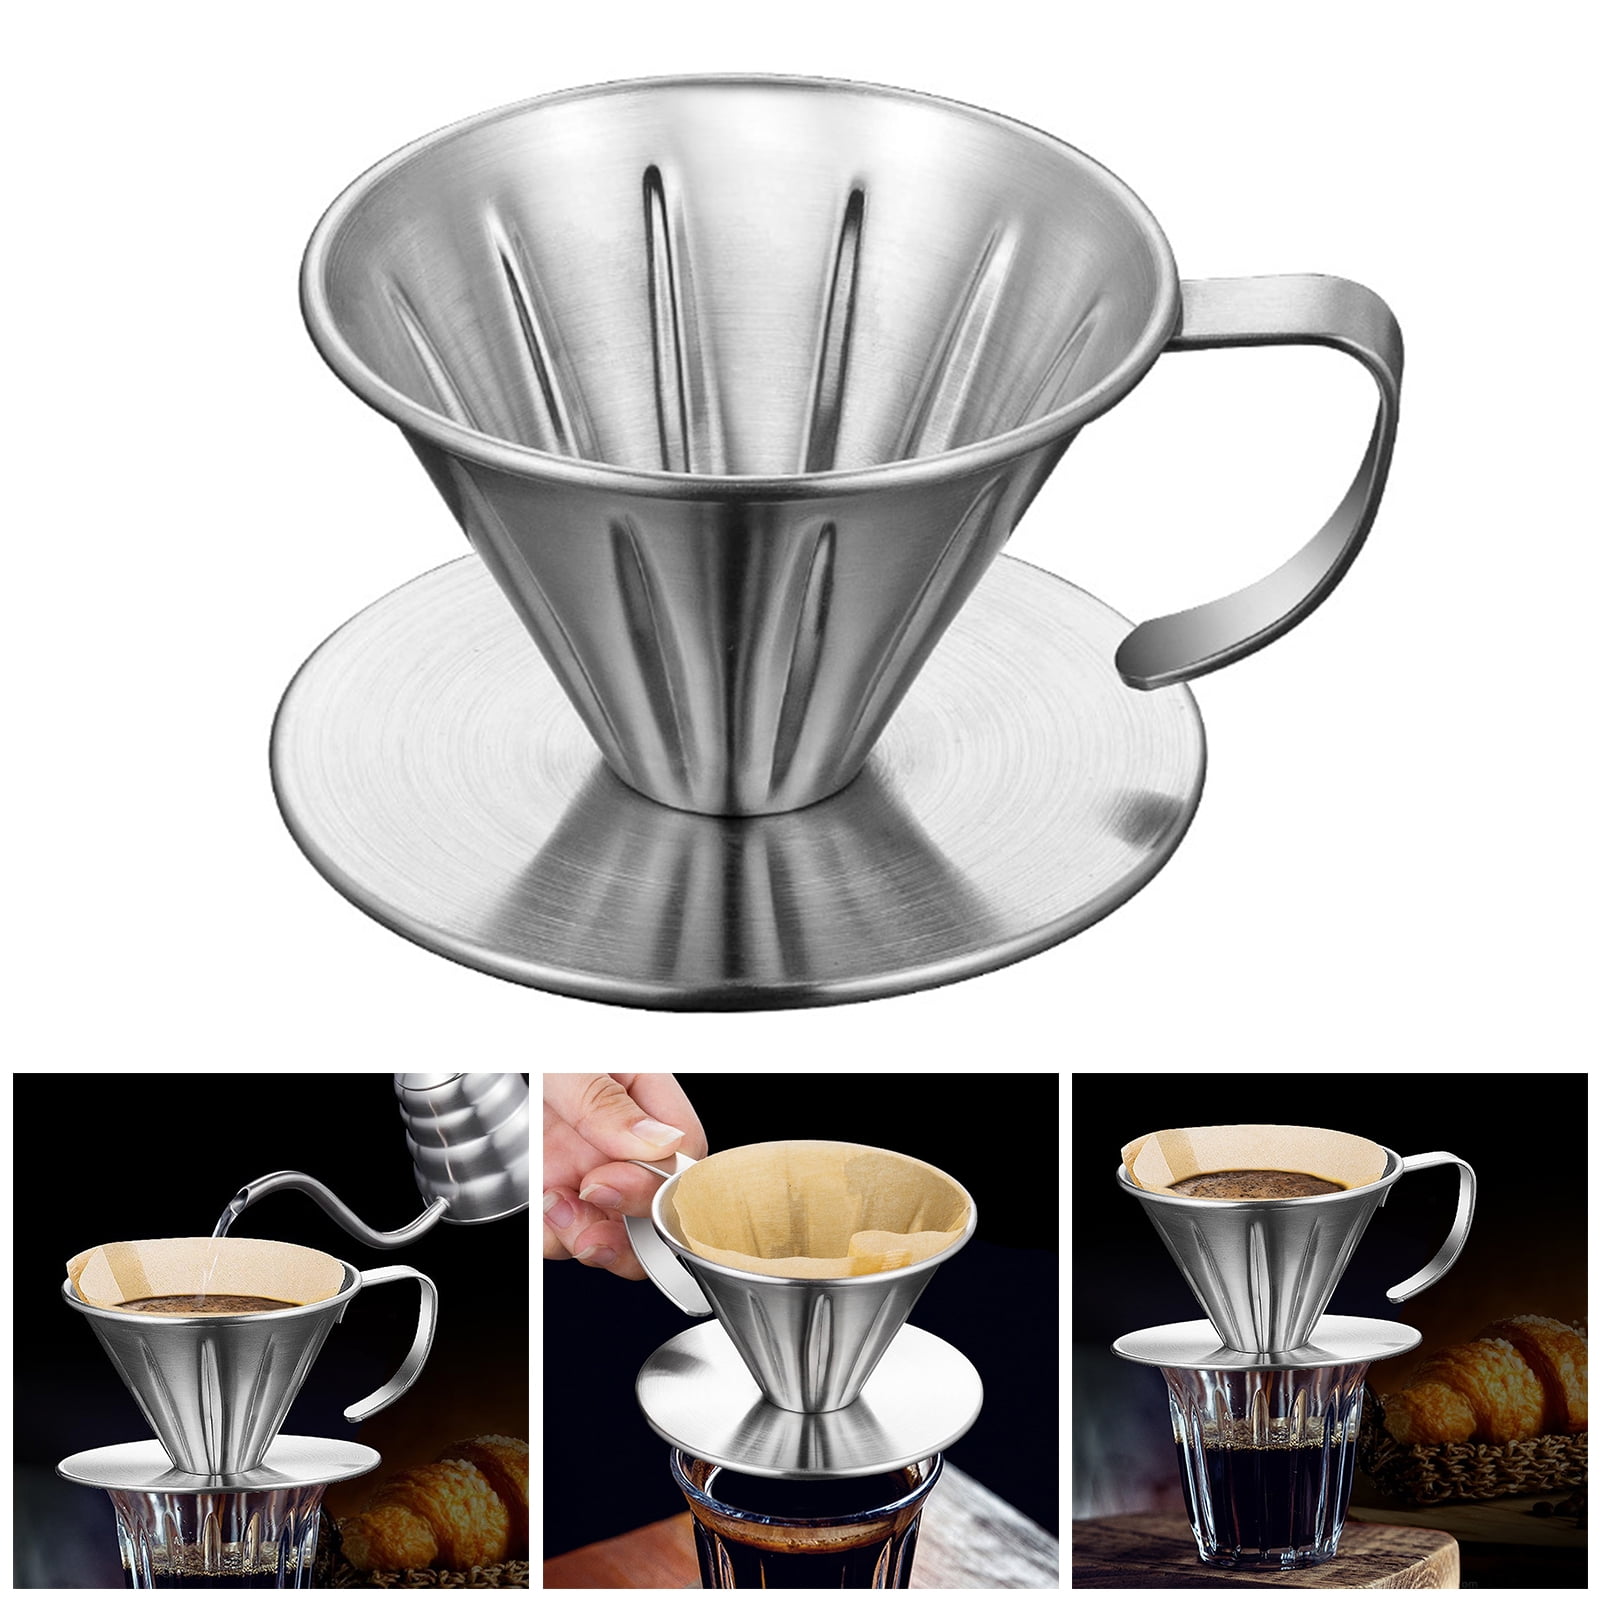  Segarty #2 Pour Over Coffee Maker, Single Cup Black Ceramic  Coffee Dripper, 1 Set Size No.2 Reusable Filter Cone Drip Holder Slow Brewer  with 3 Holes Flat Bottom for Travel, Camping